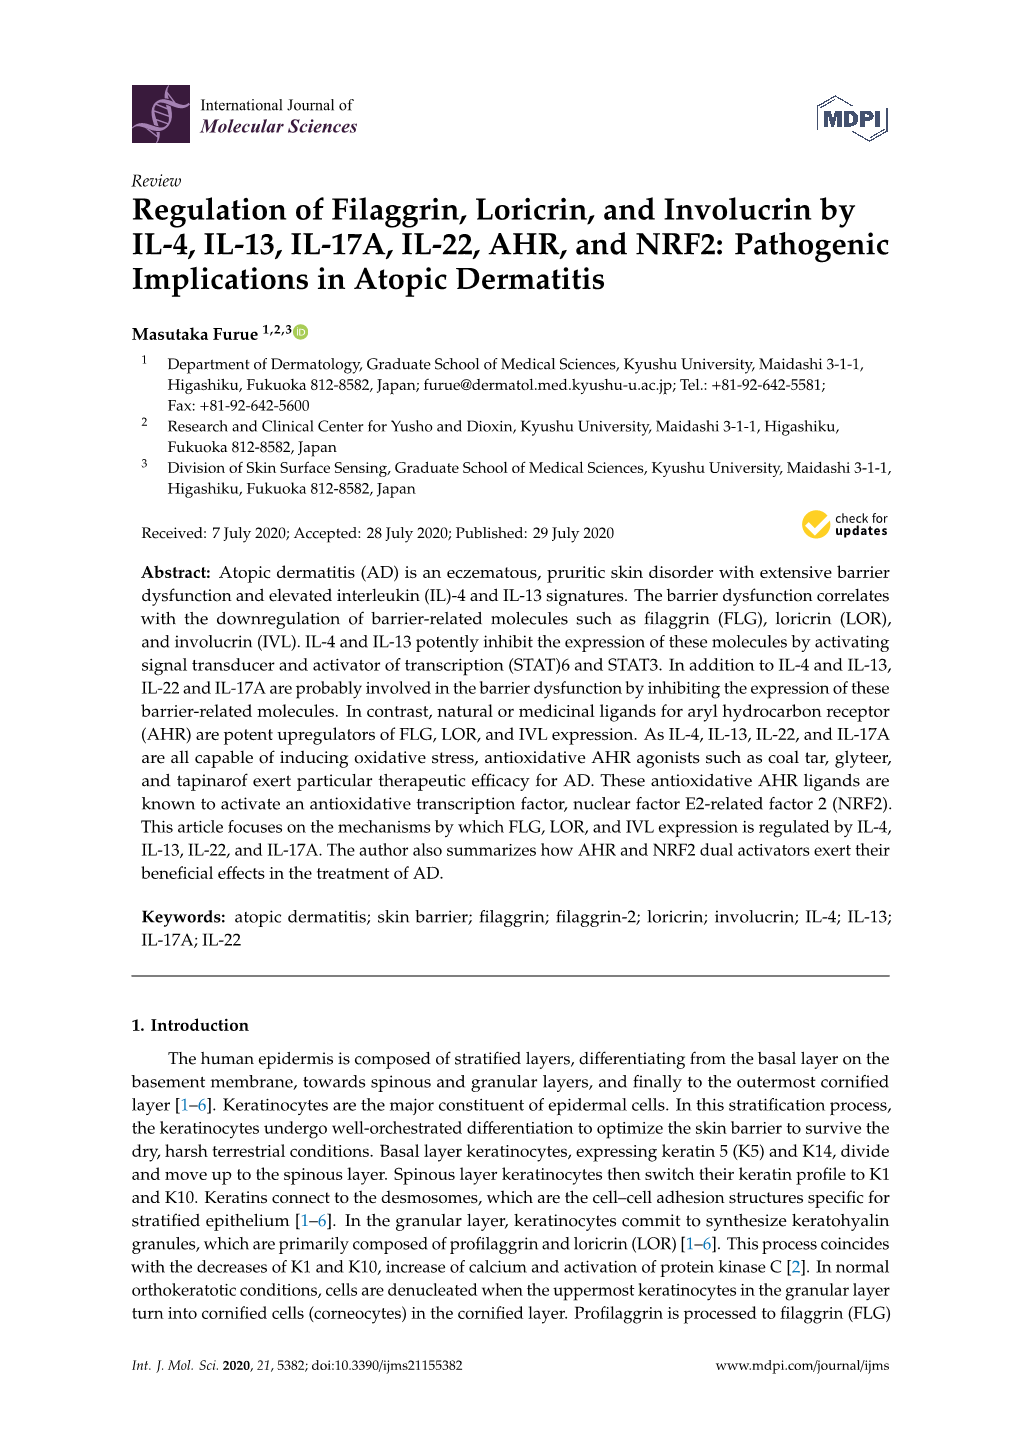 Regulation of Filaggrin, Loricrin, and Involucrin by IL-4, IL-13, IL-17A, IL-22, AHR, and NRF2: Pathogenic Implications in Atopic Dermatitis